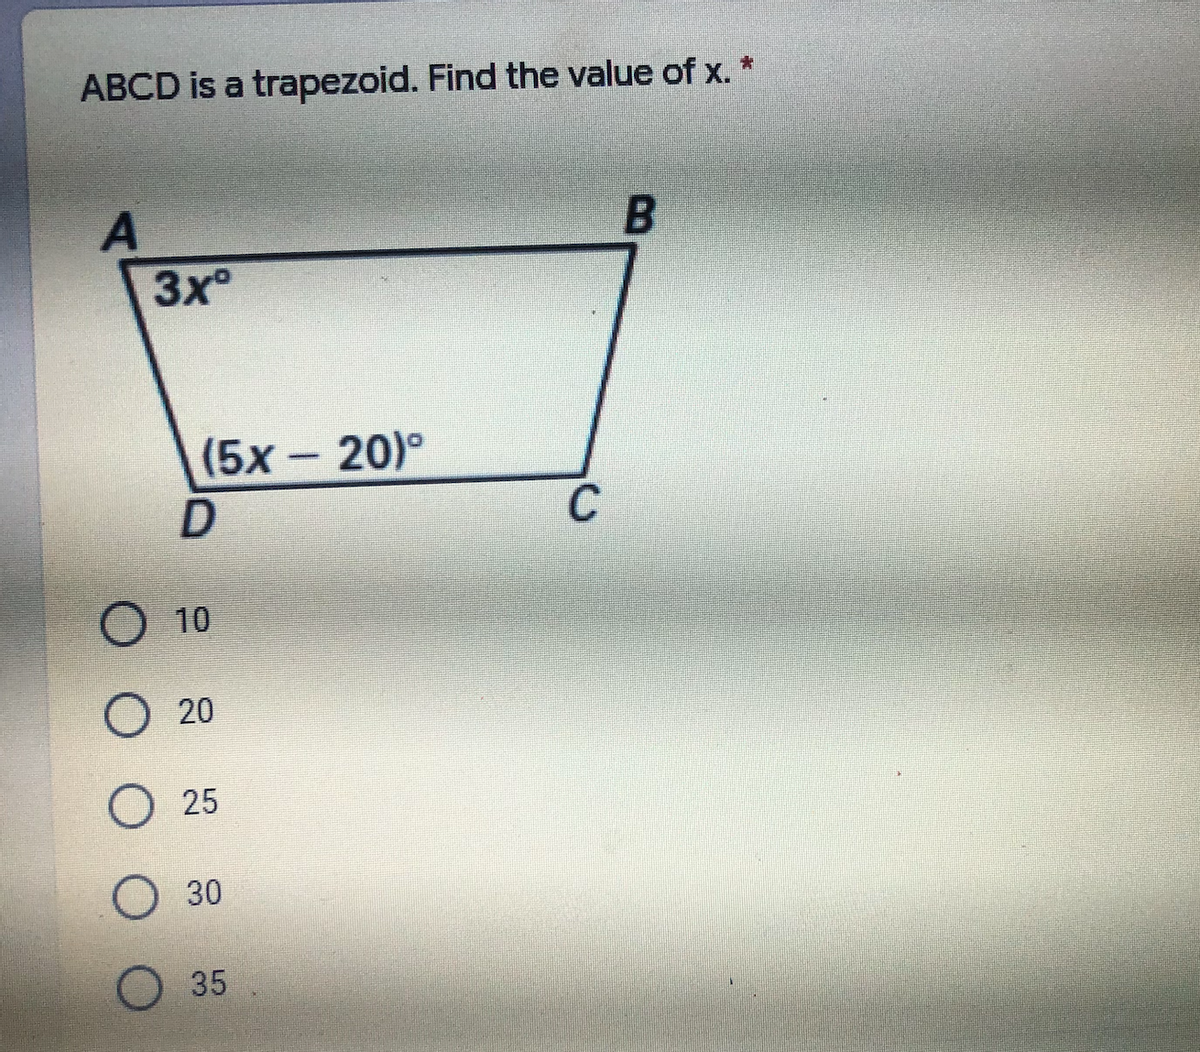 ABCD is a trapezoid. Find the value of x. *
B.
3x°
(5x - 20)°
C
10
20
25
30
35
